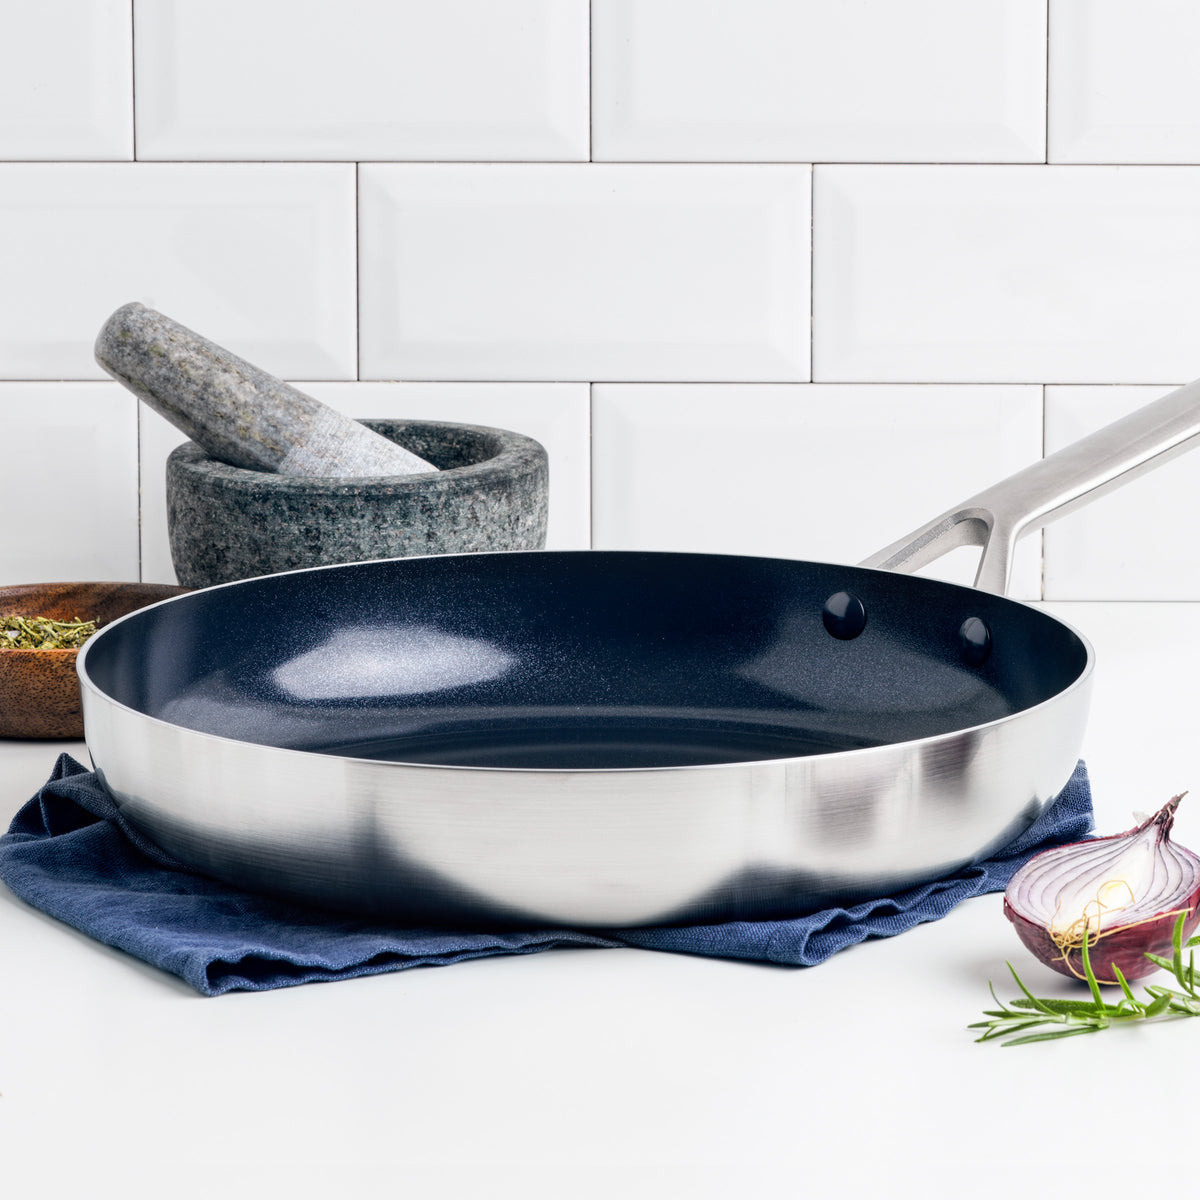 Blue Diamond Cookware Ceramic Nonstick Frying Pan/Skillet with Lid